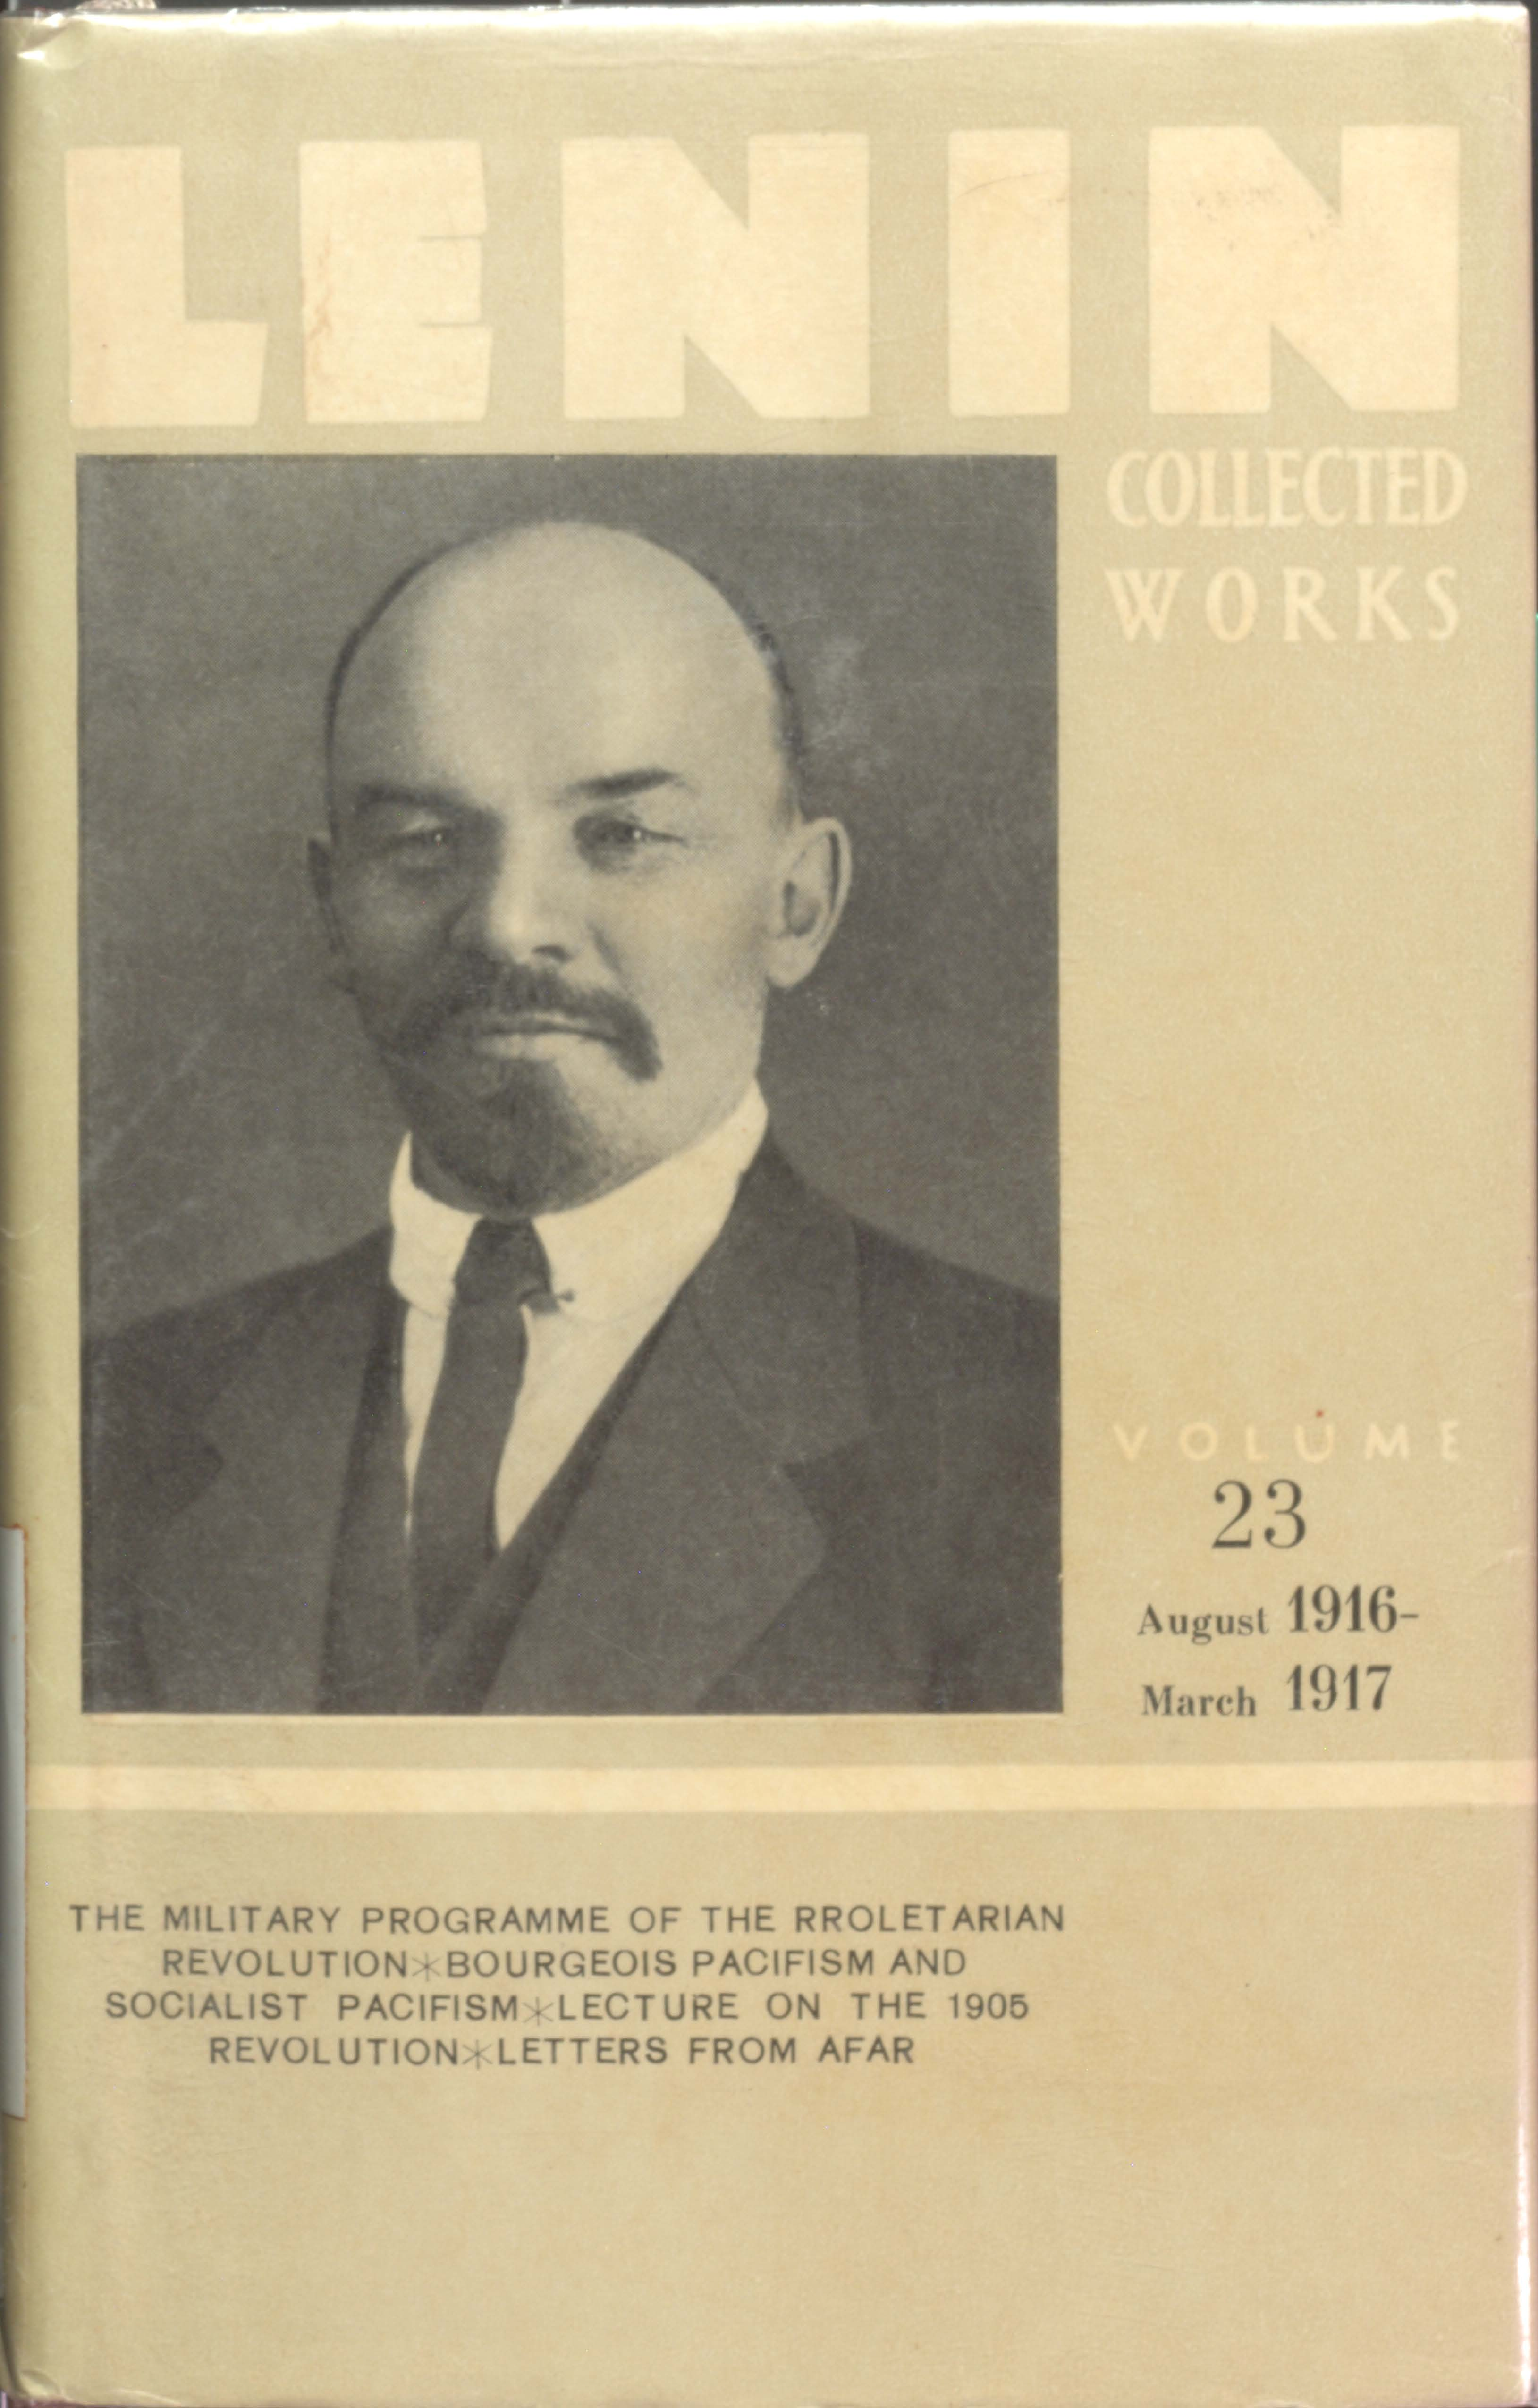 Lenin Collected Works [August 1916 - March 1917  Vol - 23 ]